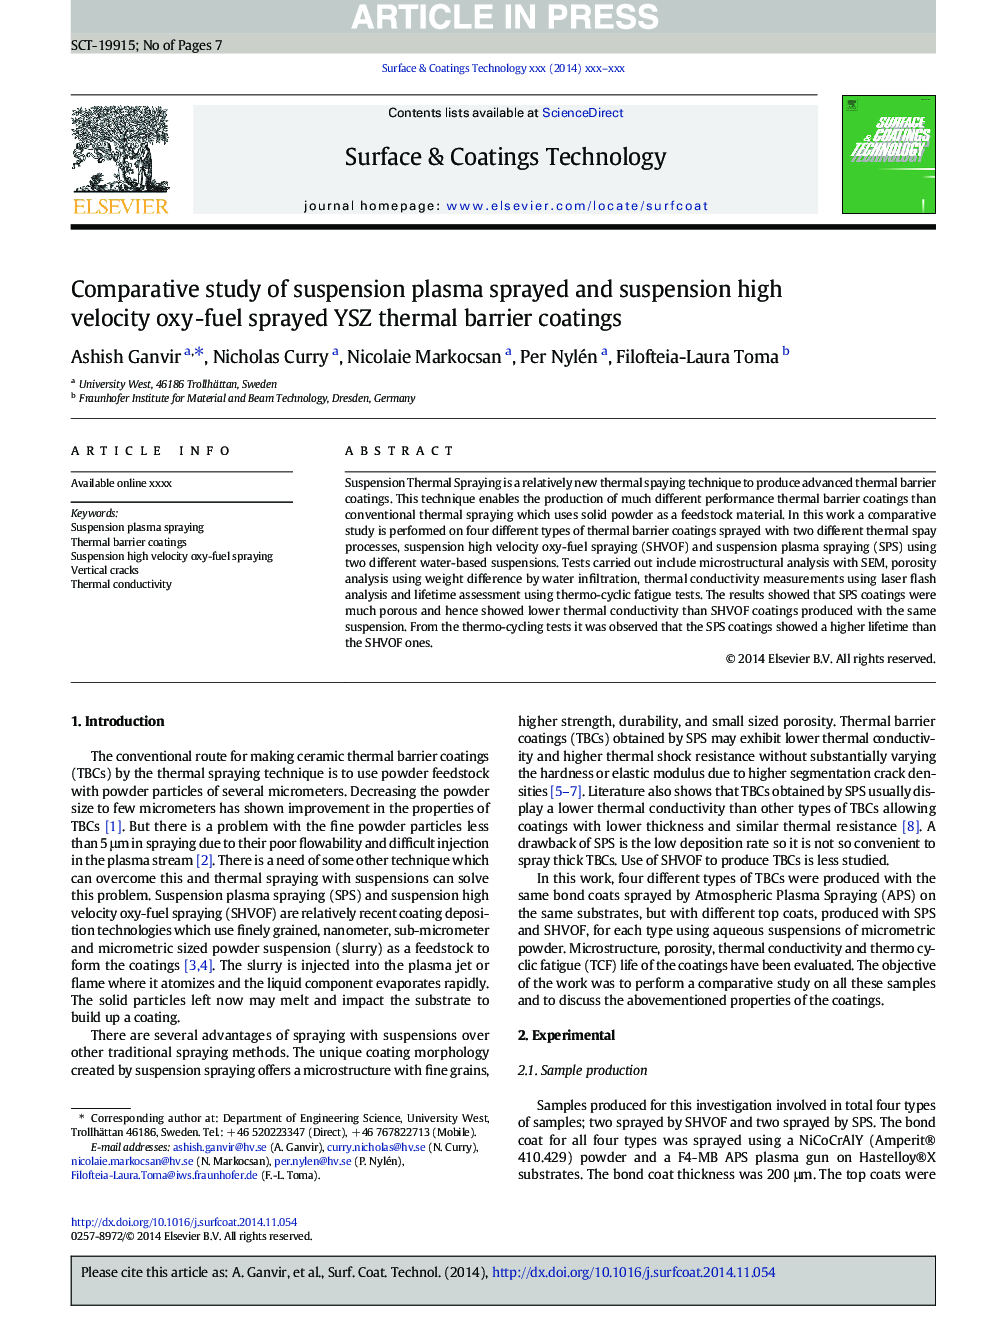 Comparative study of suspension plasma sprayed and suspension high velocity oxyÂ -fuel sprayed YSZ thermal barrier coatings